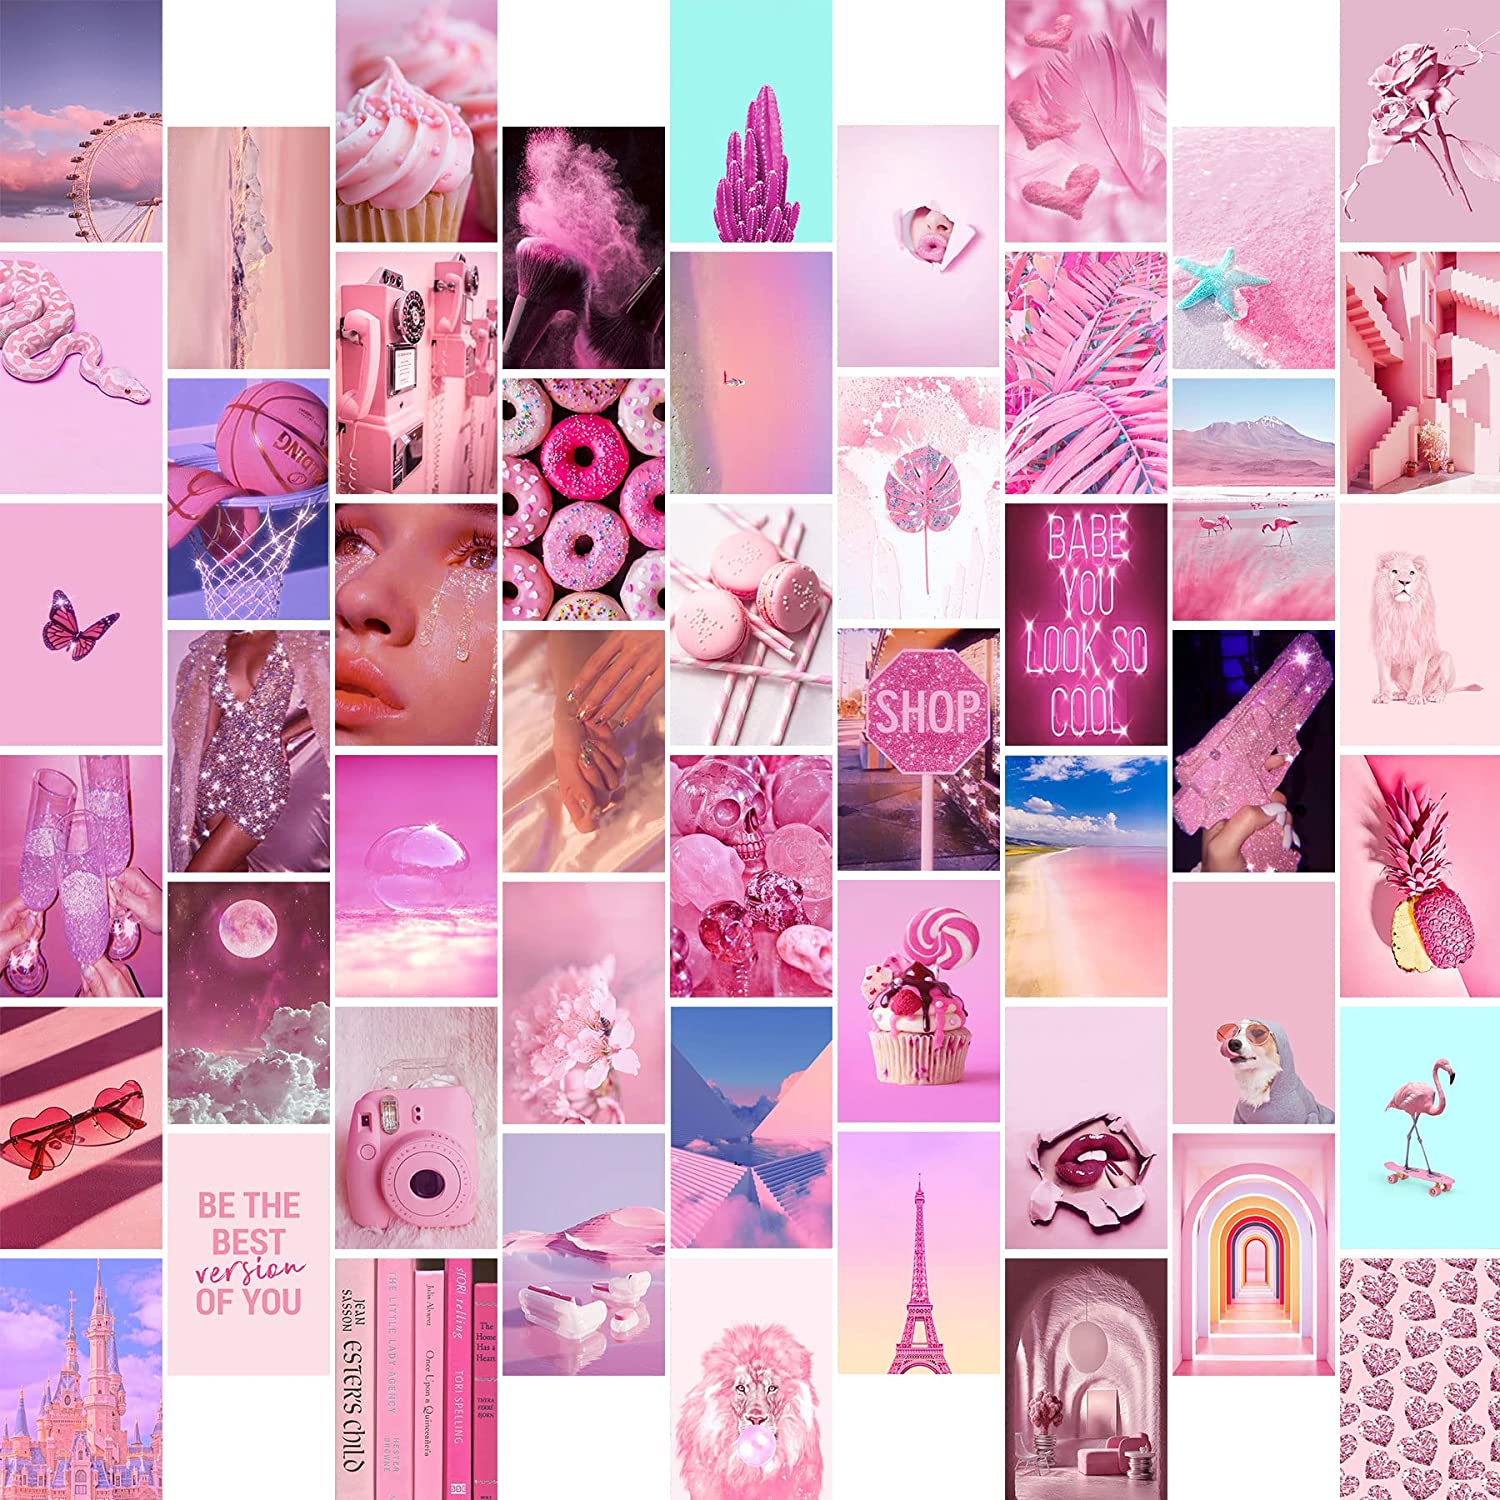 Pink Wall Collage Kit Aesthetic Picture, 50 Set Photo Collage Kit For Wall Aesthetic, Posters For Room Aesthetic, Trendy Aesthetic Pink Collage Kit, Cute Pastel Pink College Dorm Decor (4*6 Inch)